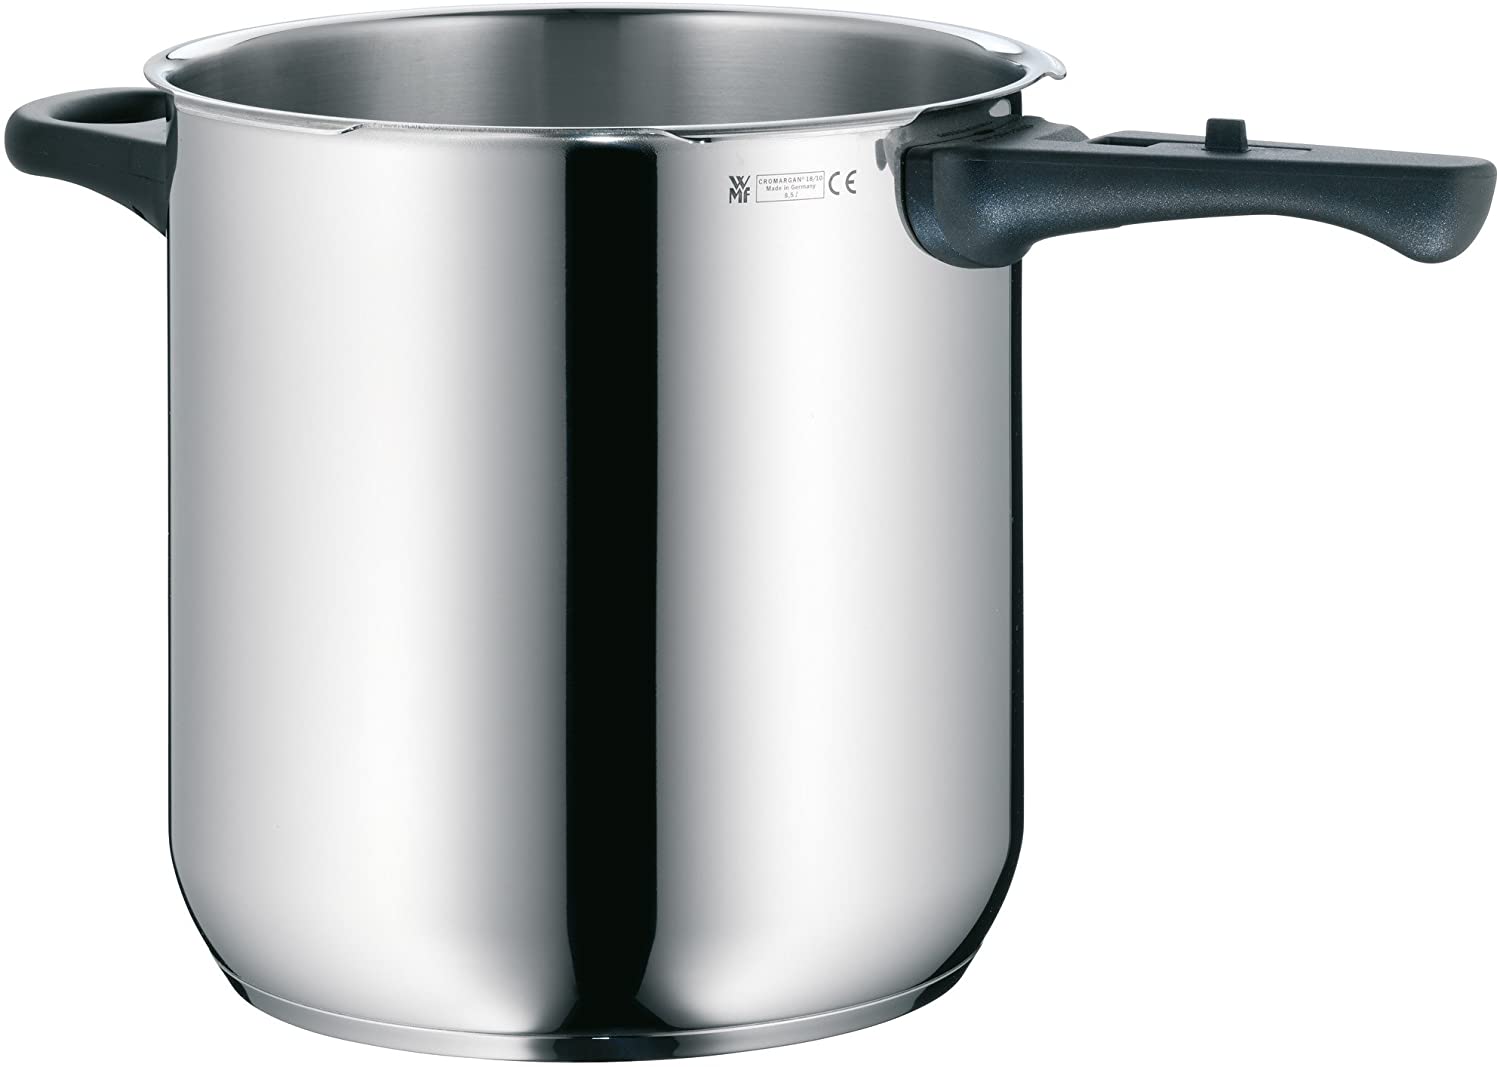 WMF Perfect Pressure Cooker Base 8.5L without Lid Ø 22 cm Inside Scale Cromargan® Stainless Steel Suitable for Induction Hobs